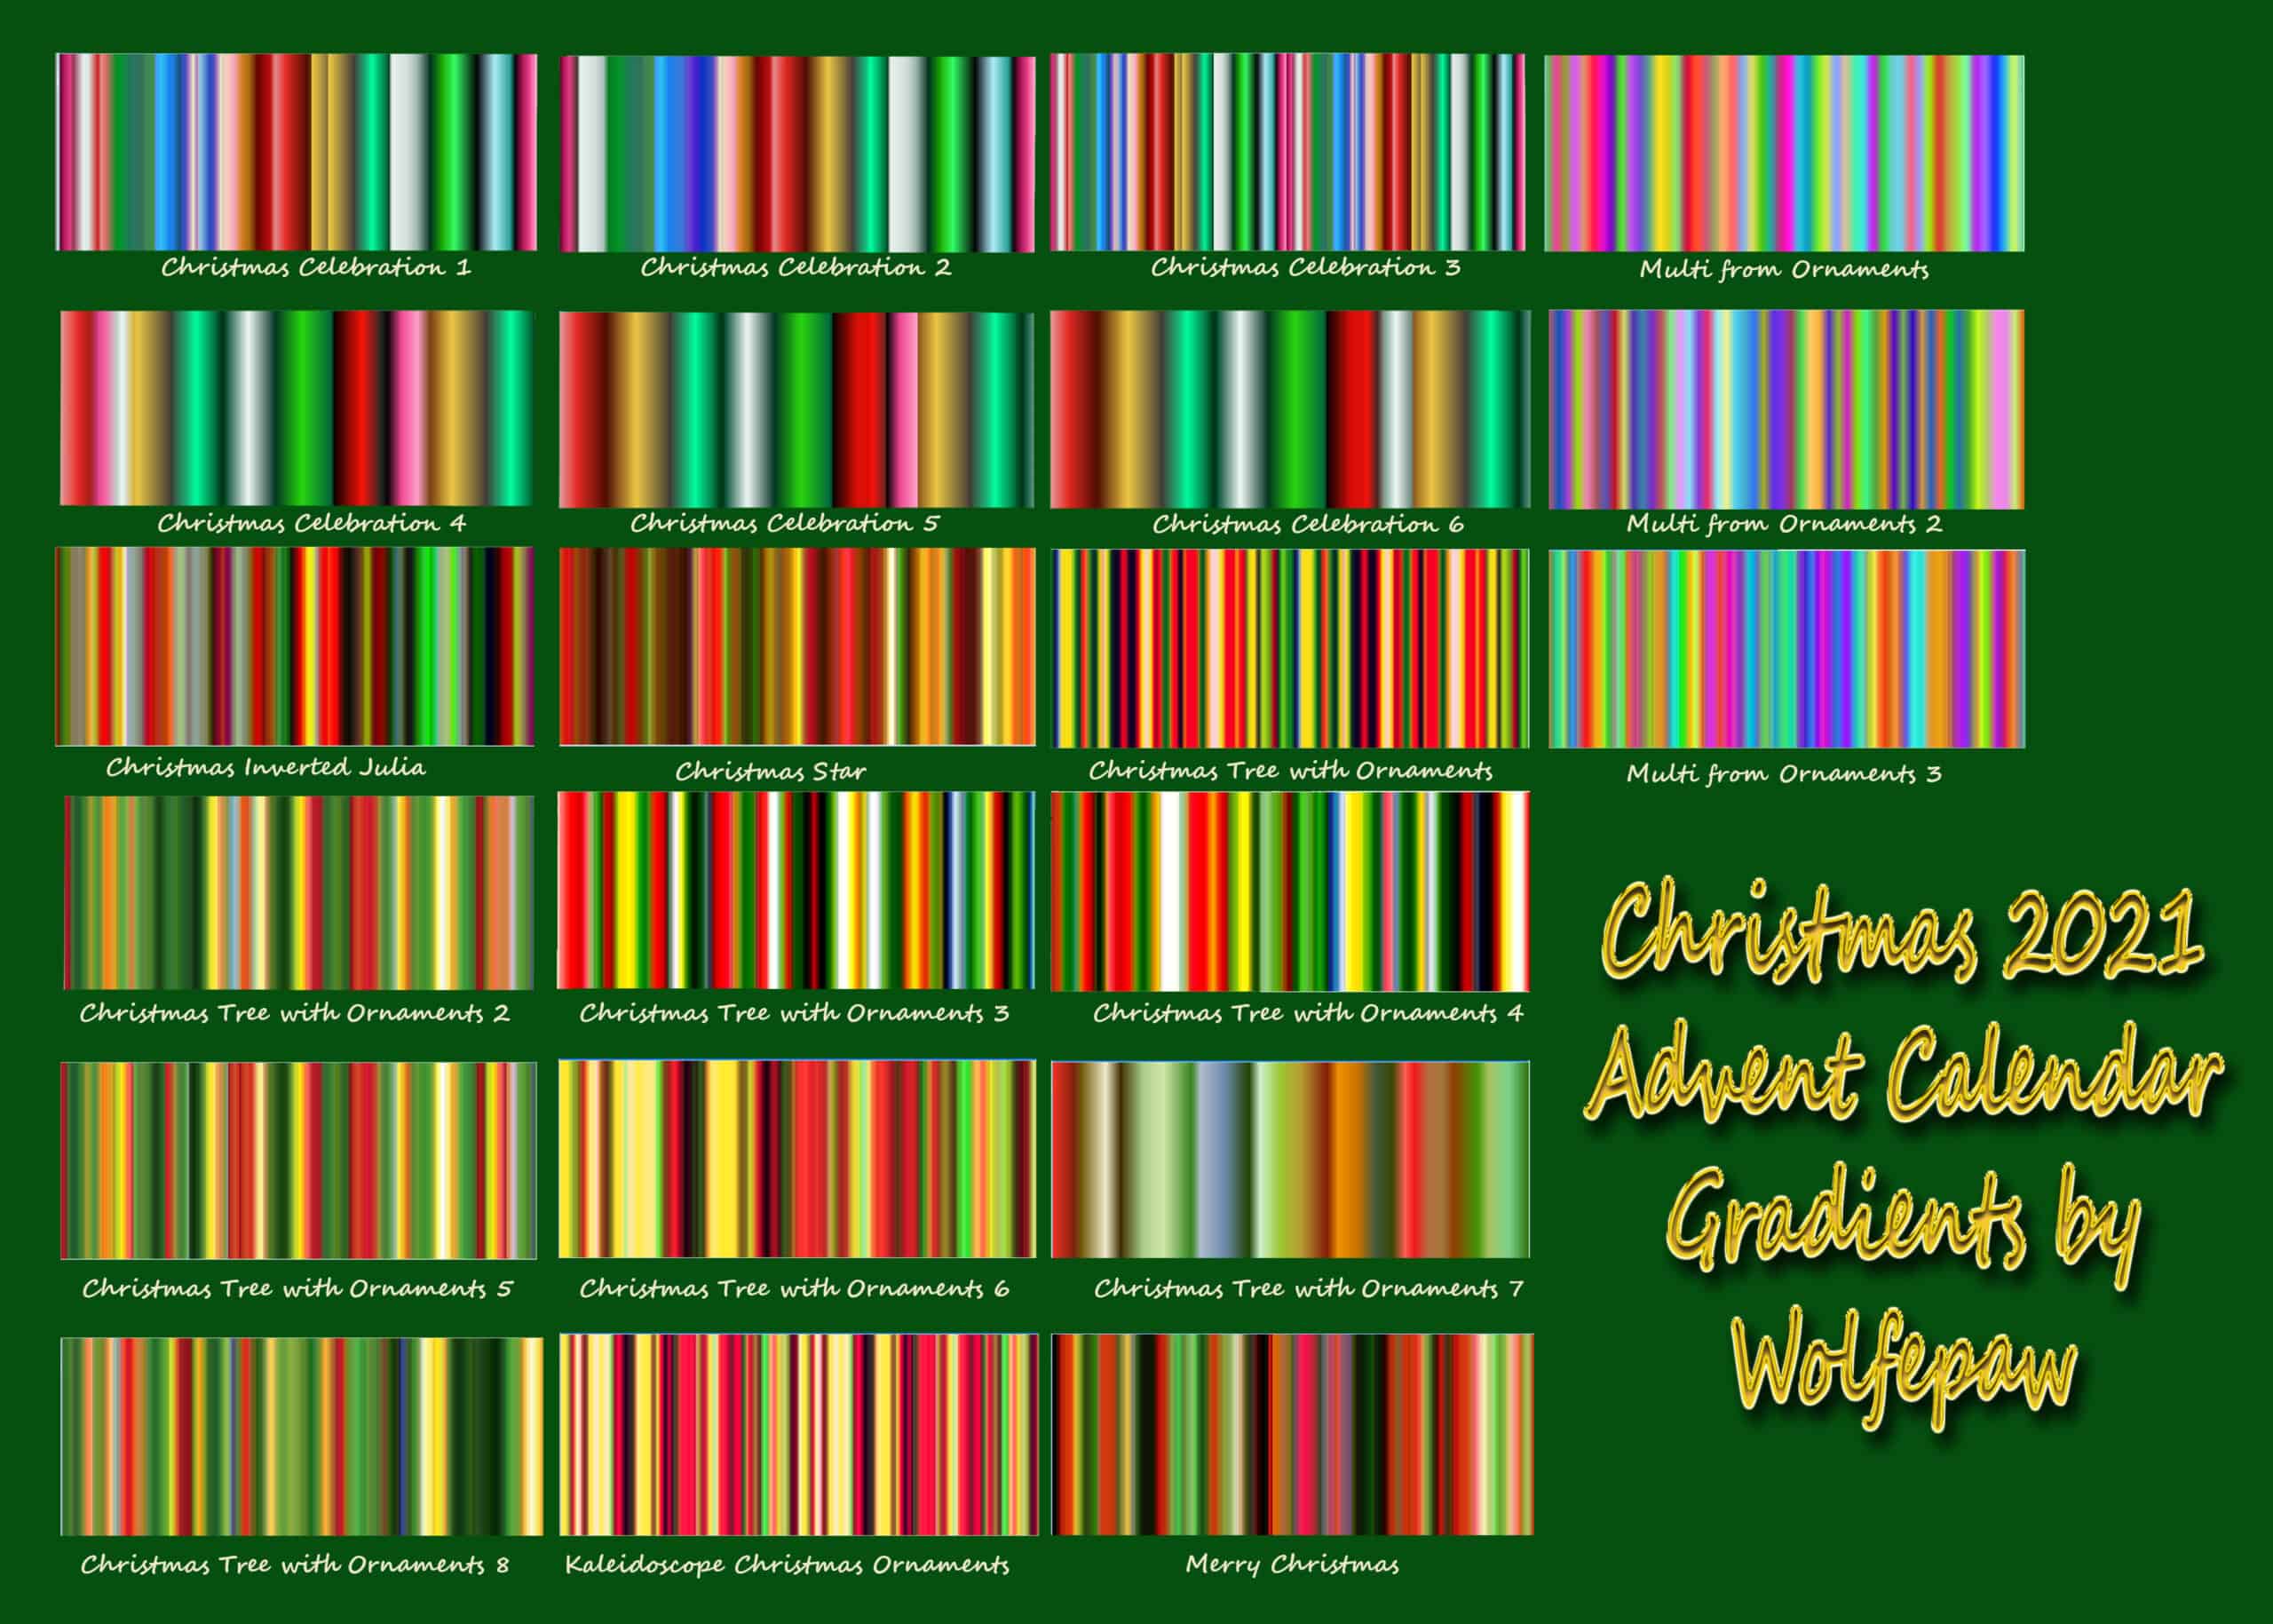 The Colors of Christmas 2021 Gradient Pack